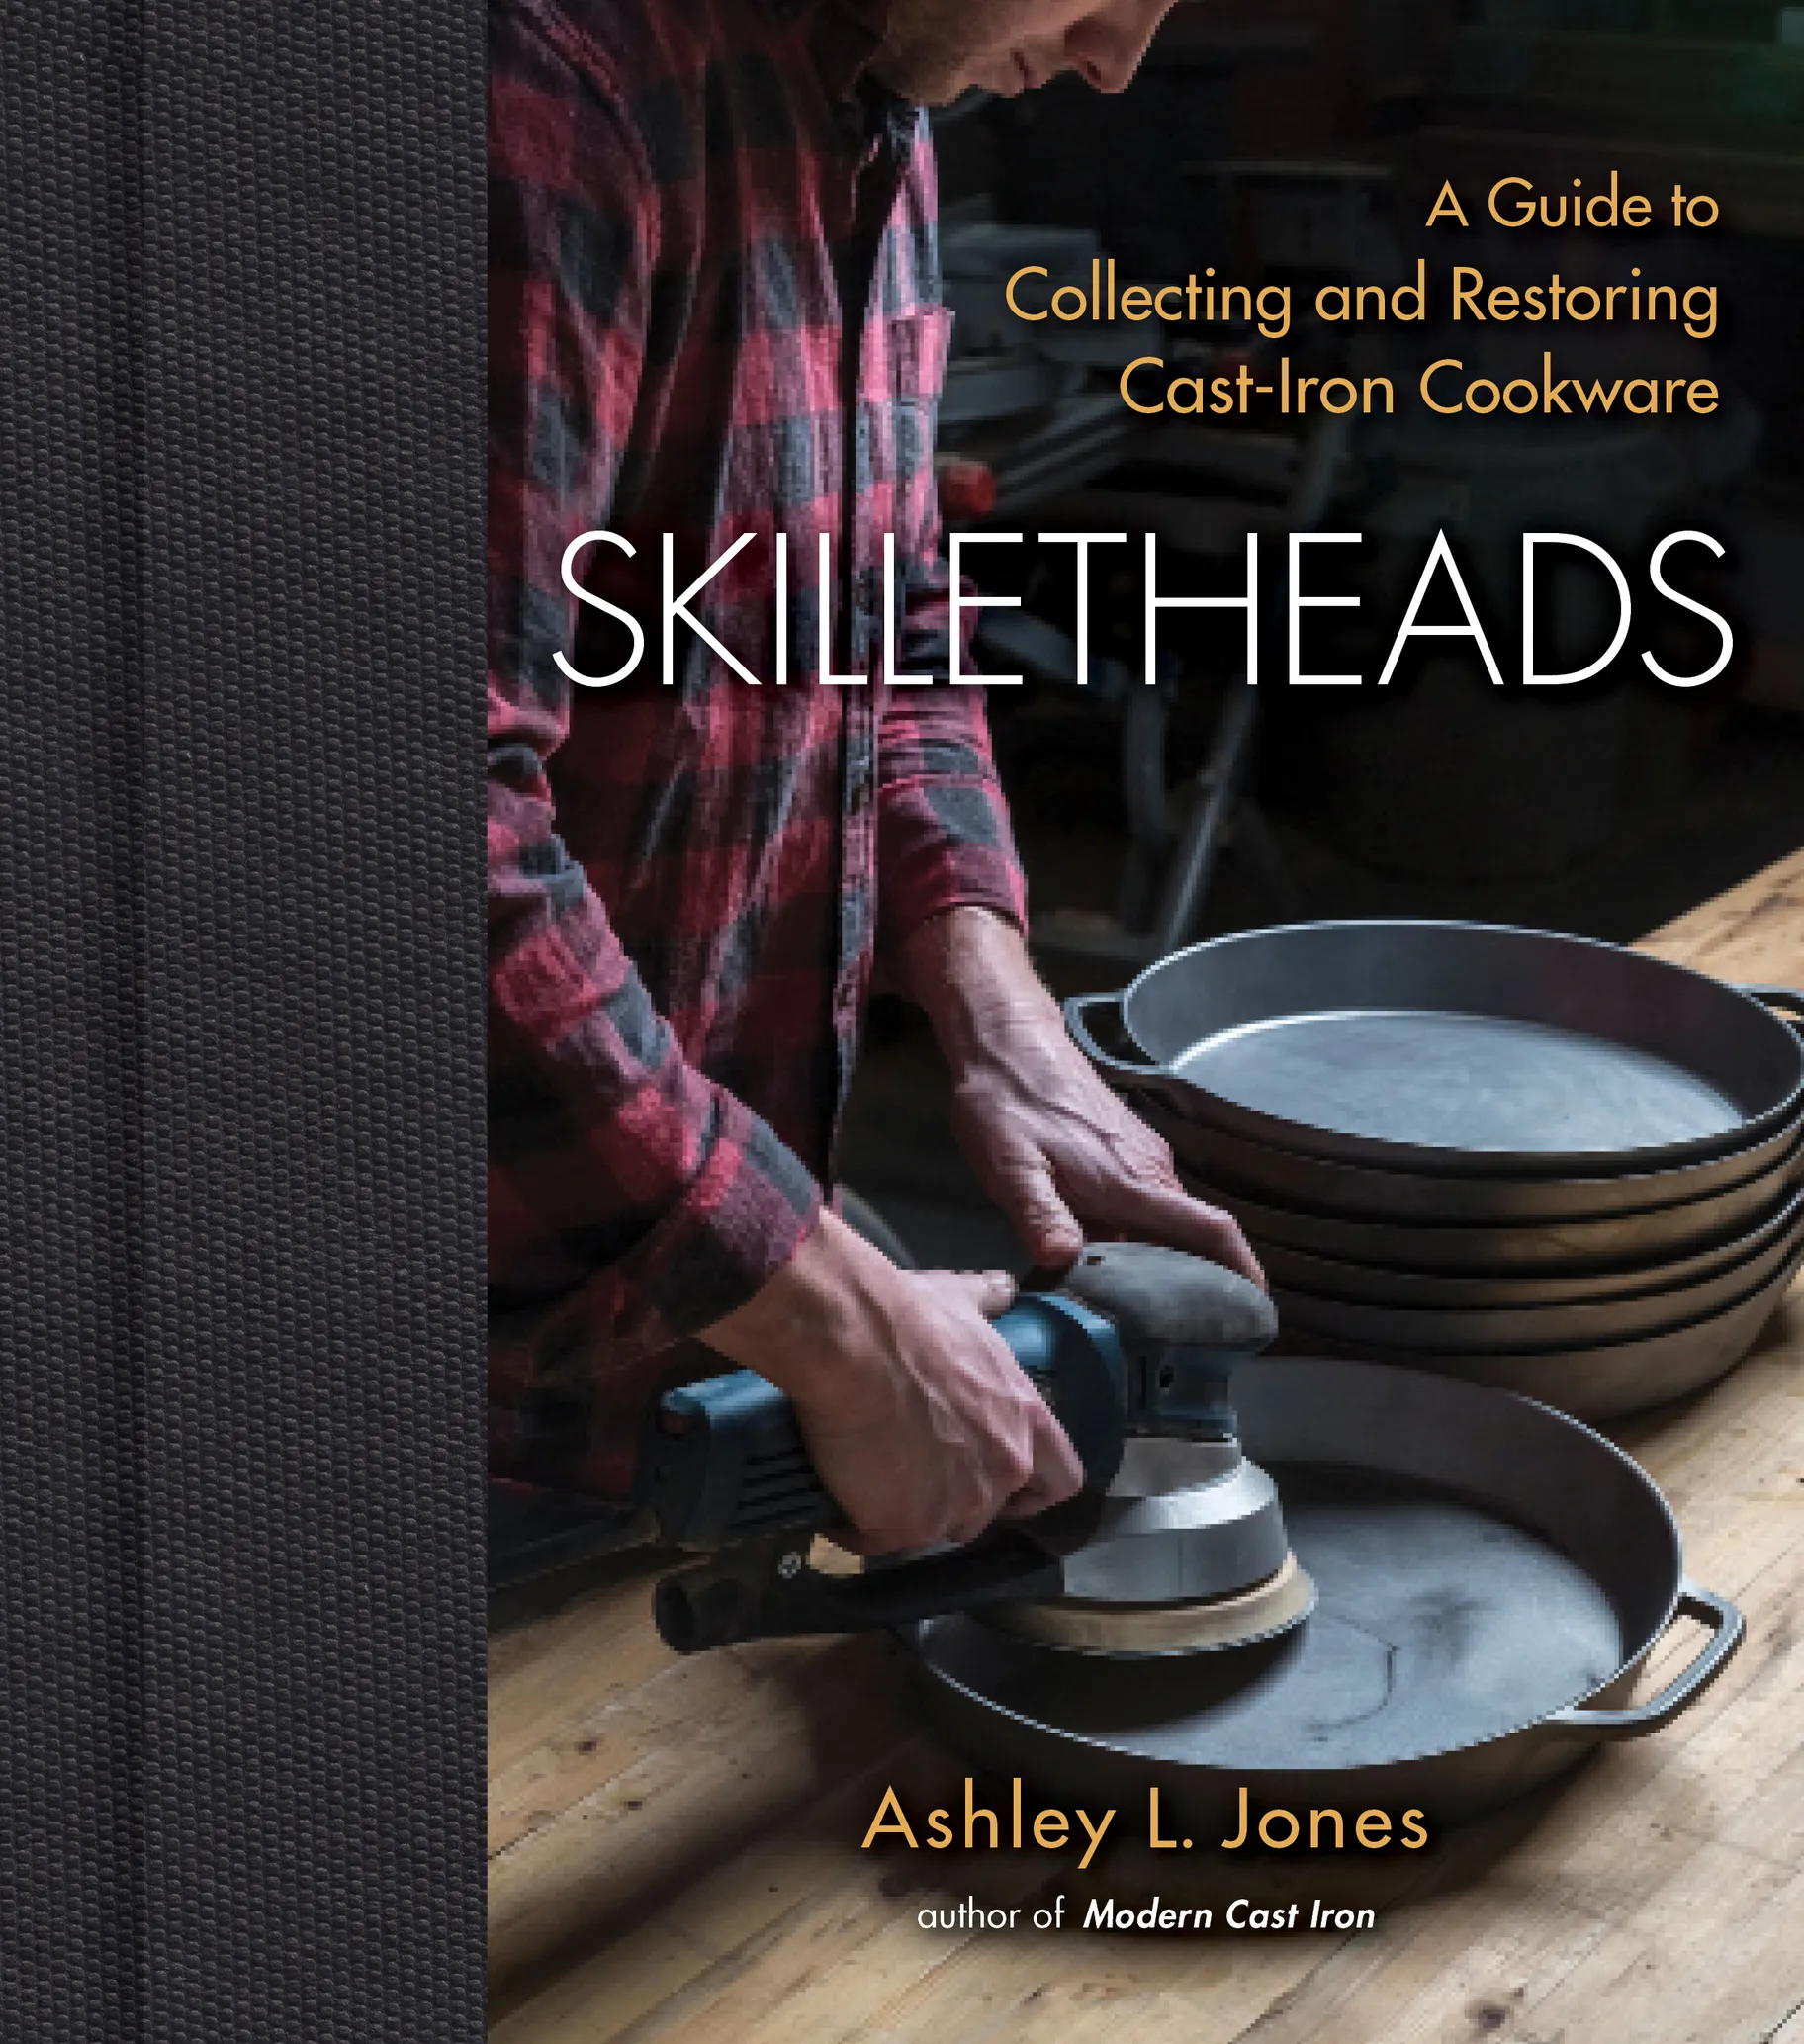 https://www.kcrw.com/culture/shows/good-food/camping-advice-cooking-outdoors-cast-iron-skillets-axe-throwing/ashley-jones-cast-iron-cooking-skilletheads/jones_skillletheads_s23_cover_revised_final.jpg/@@images/2061d326-29e2-4dac-a171-d62a72fe5d44.webp